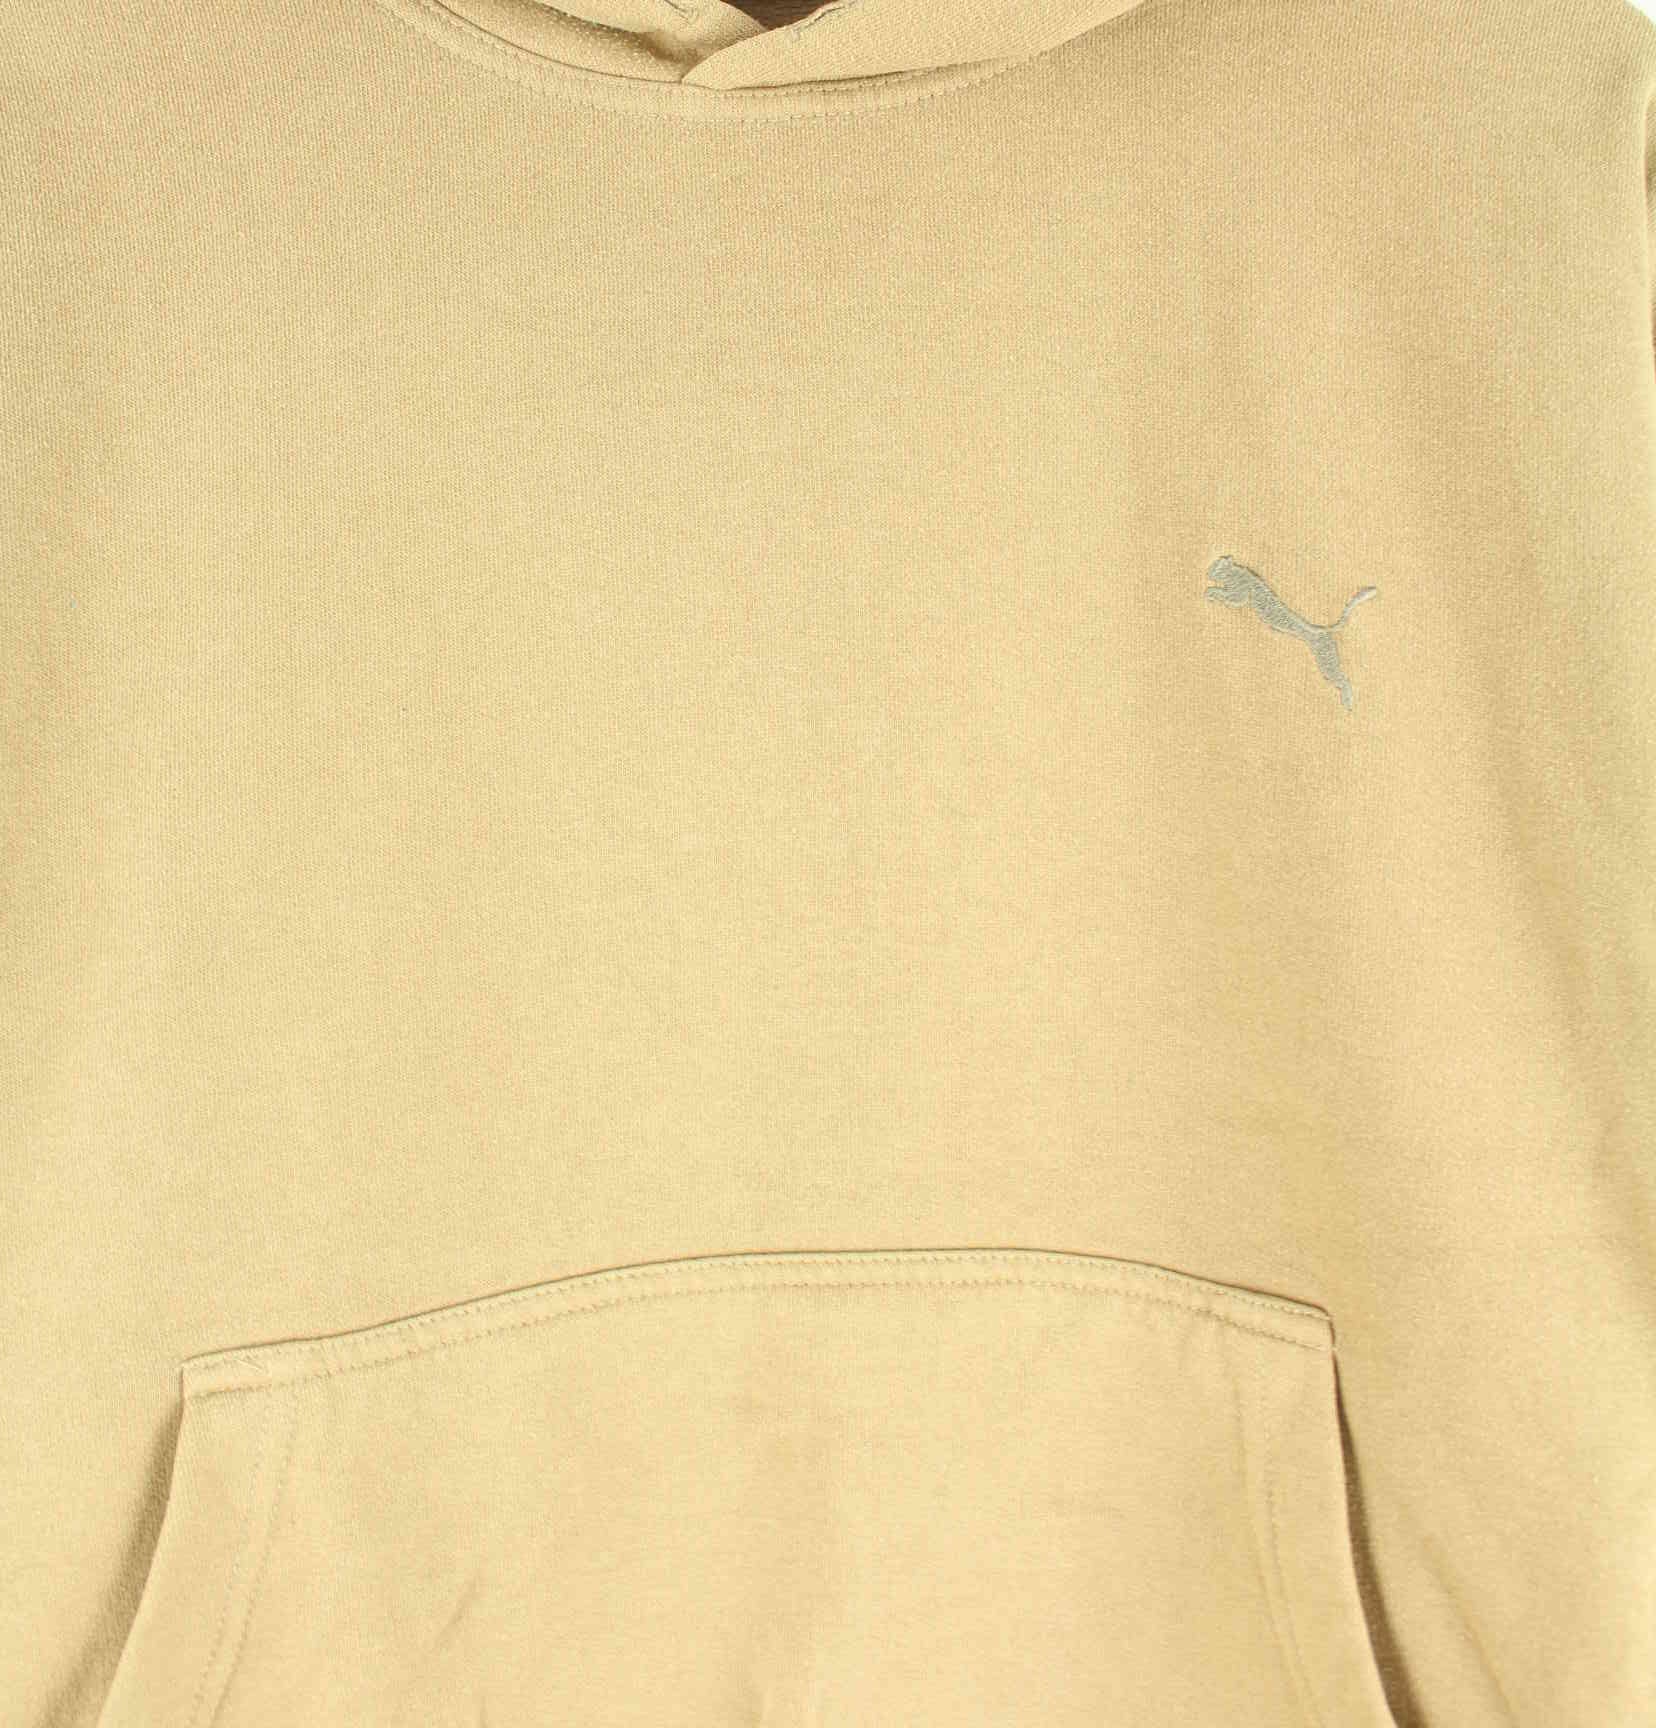 Puma 00s Embroidered Hoodie Beige L (detail image 1)